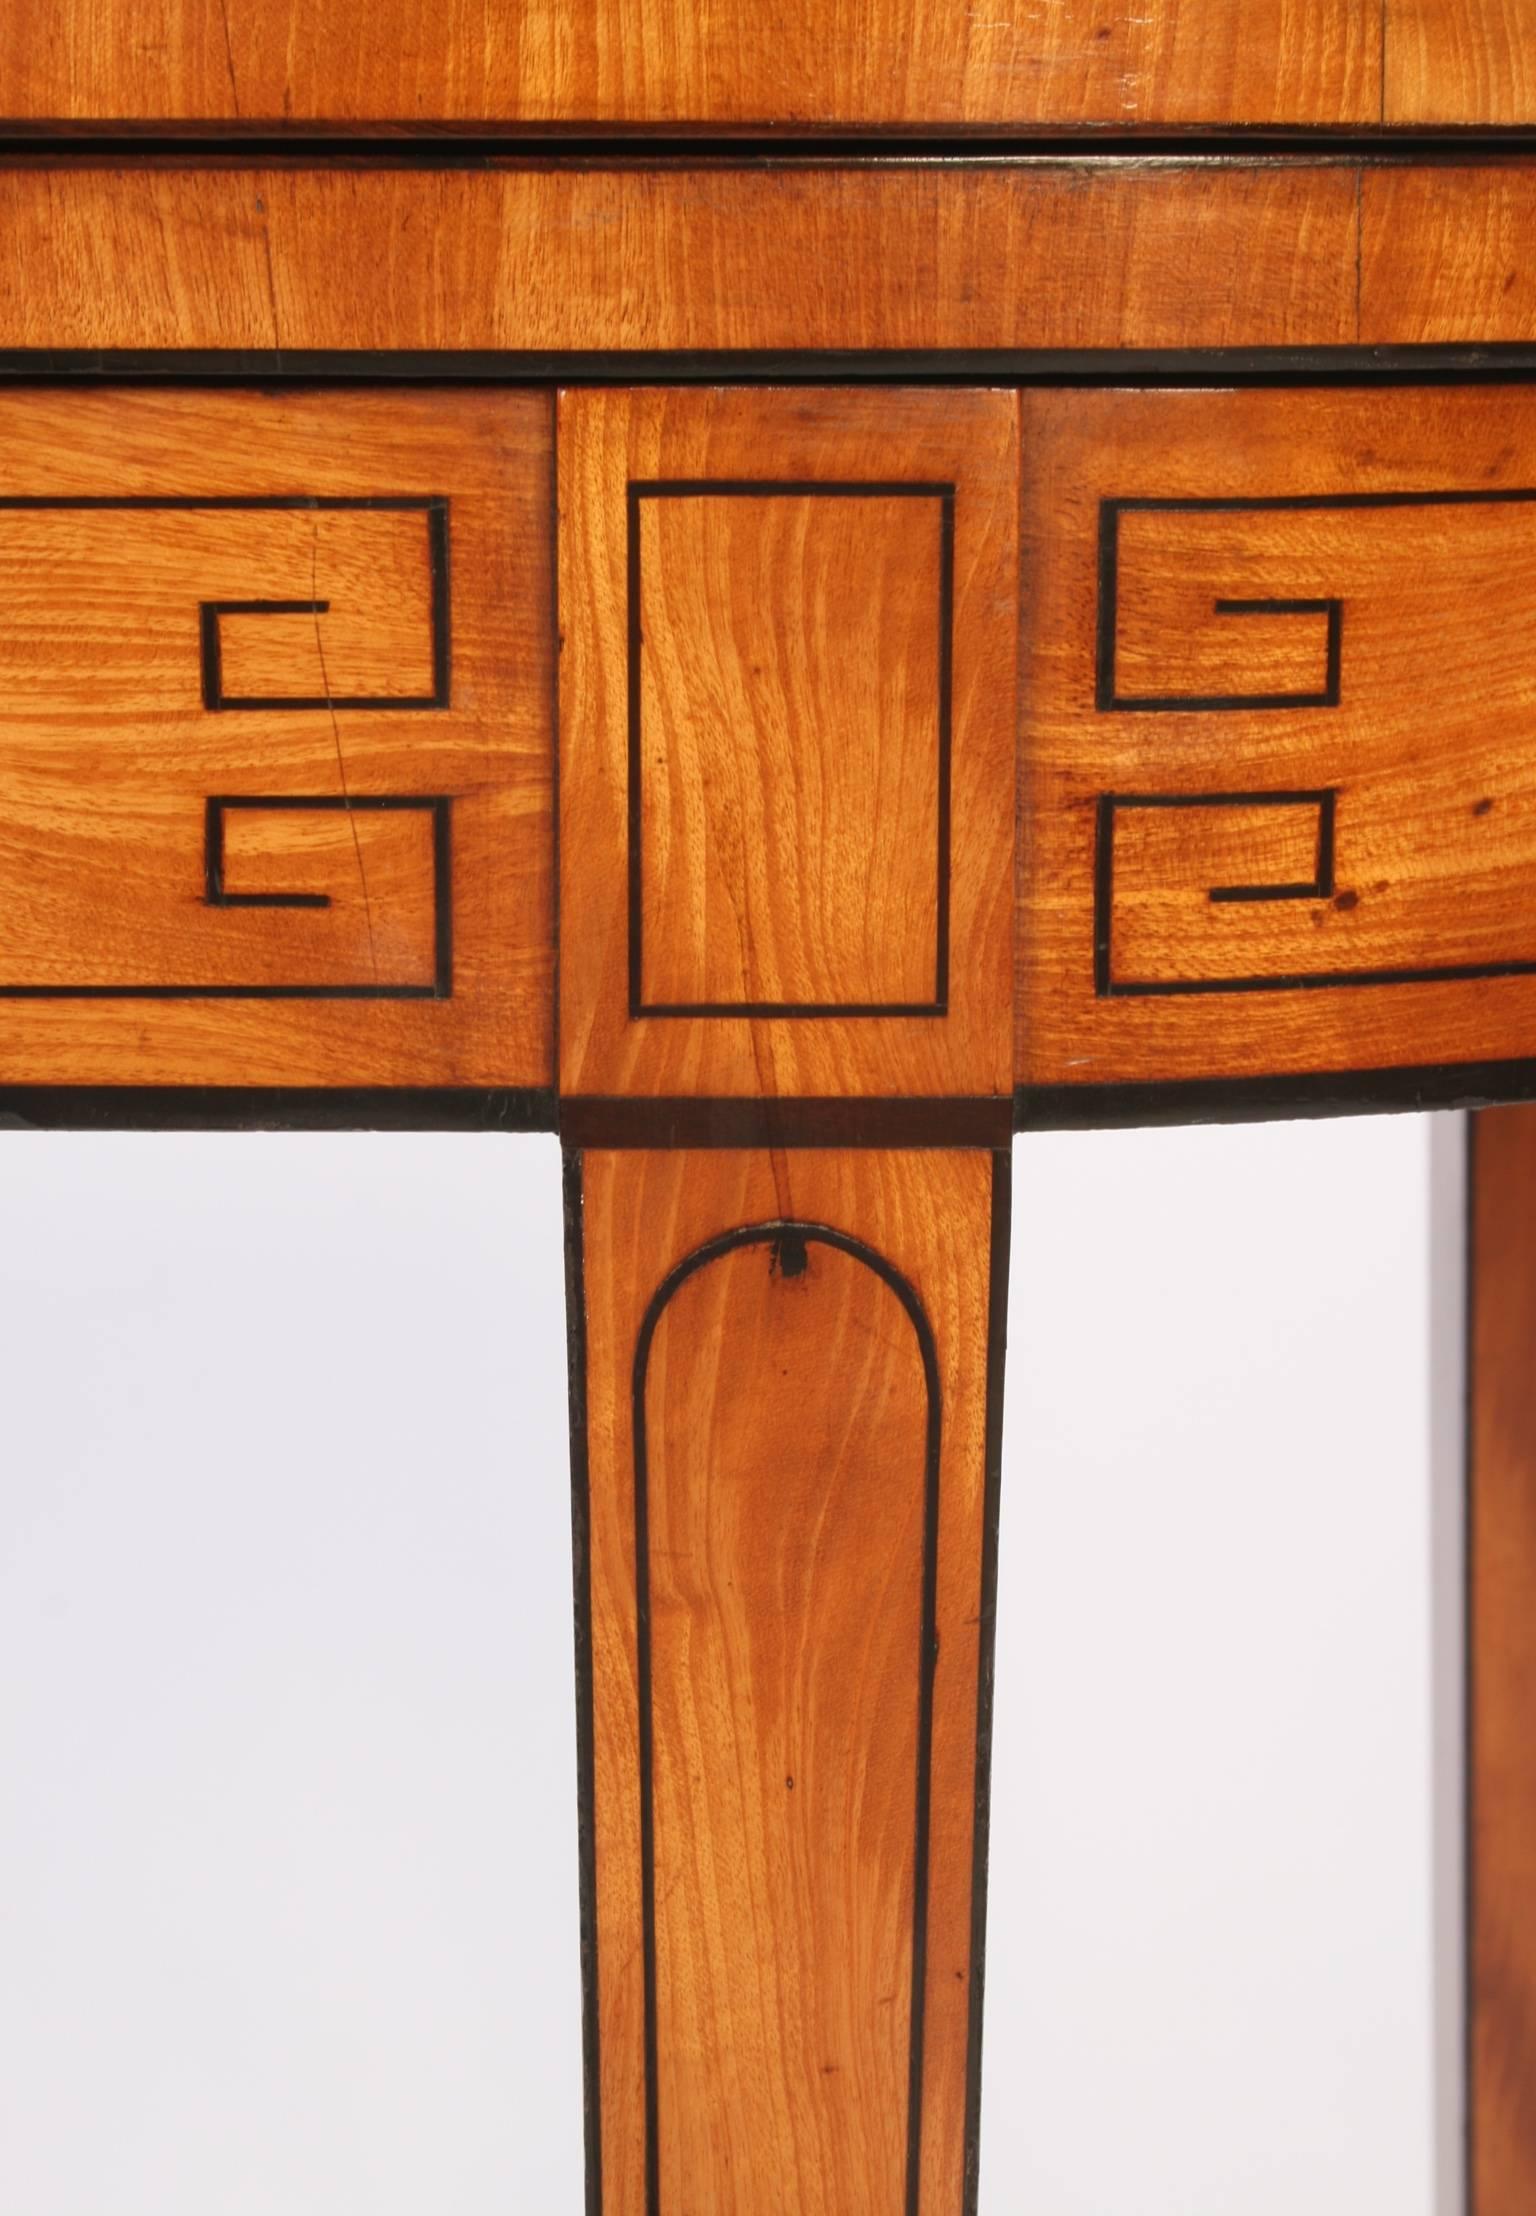 A very impressive late eighteenth century satinwood card table of small proportions and in excellent condition. Broadly cross banded in rosewood and lined with ebony and boxwood along the top. This piece has geometric ebony stringing along the